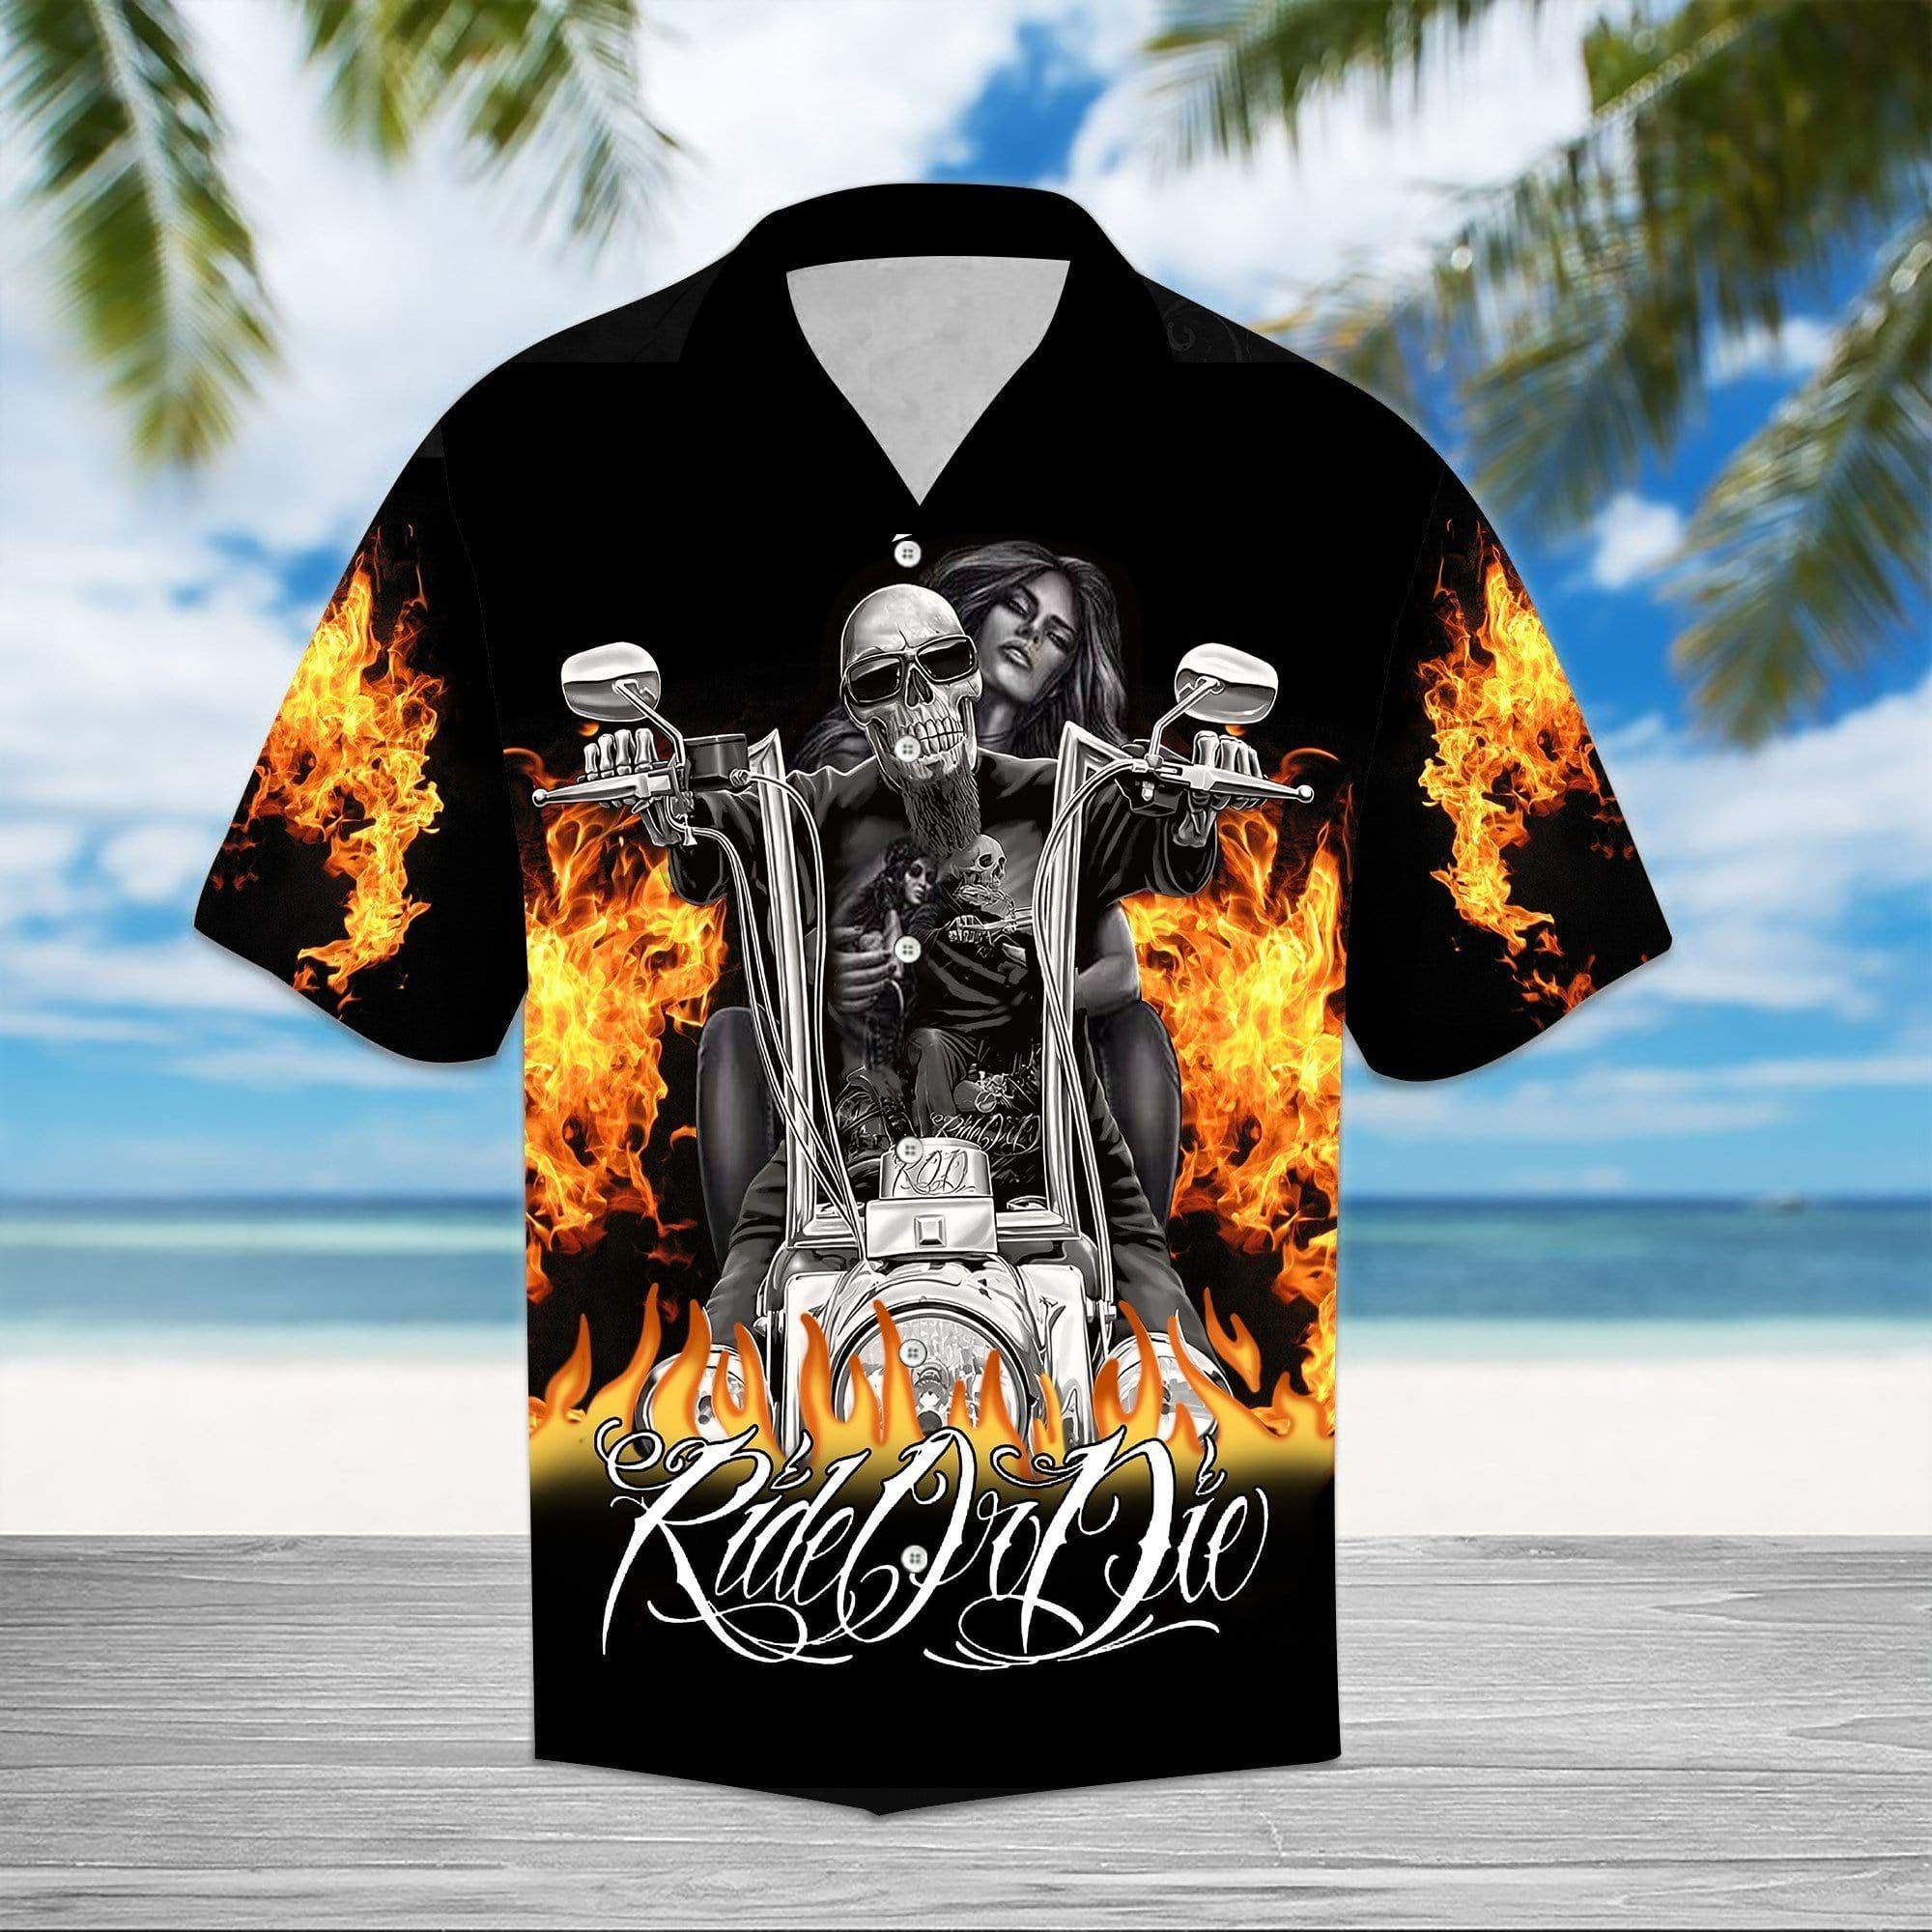 Flame American Motorcycles Gothic Skull Ride Or Die Aloha Hawaiian Shirt Colorful Short Sleeve Summer Beach Casual Shirt For Men And Women